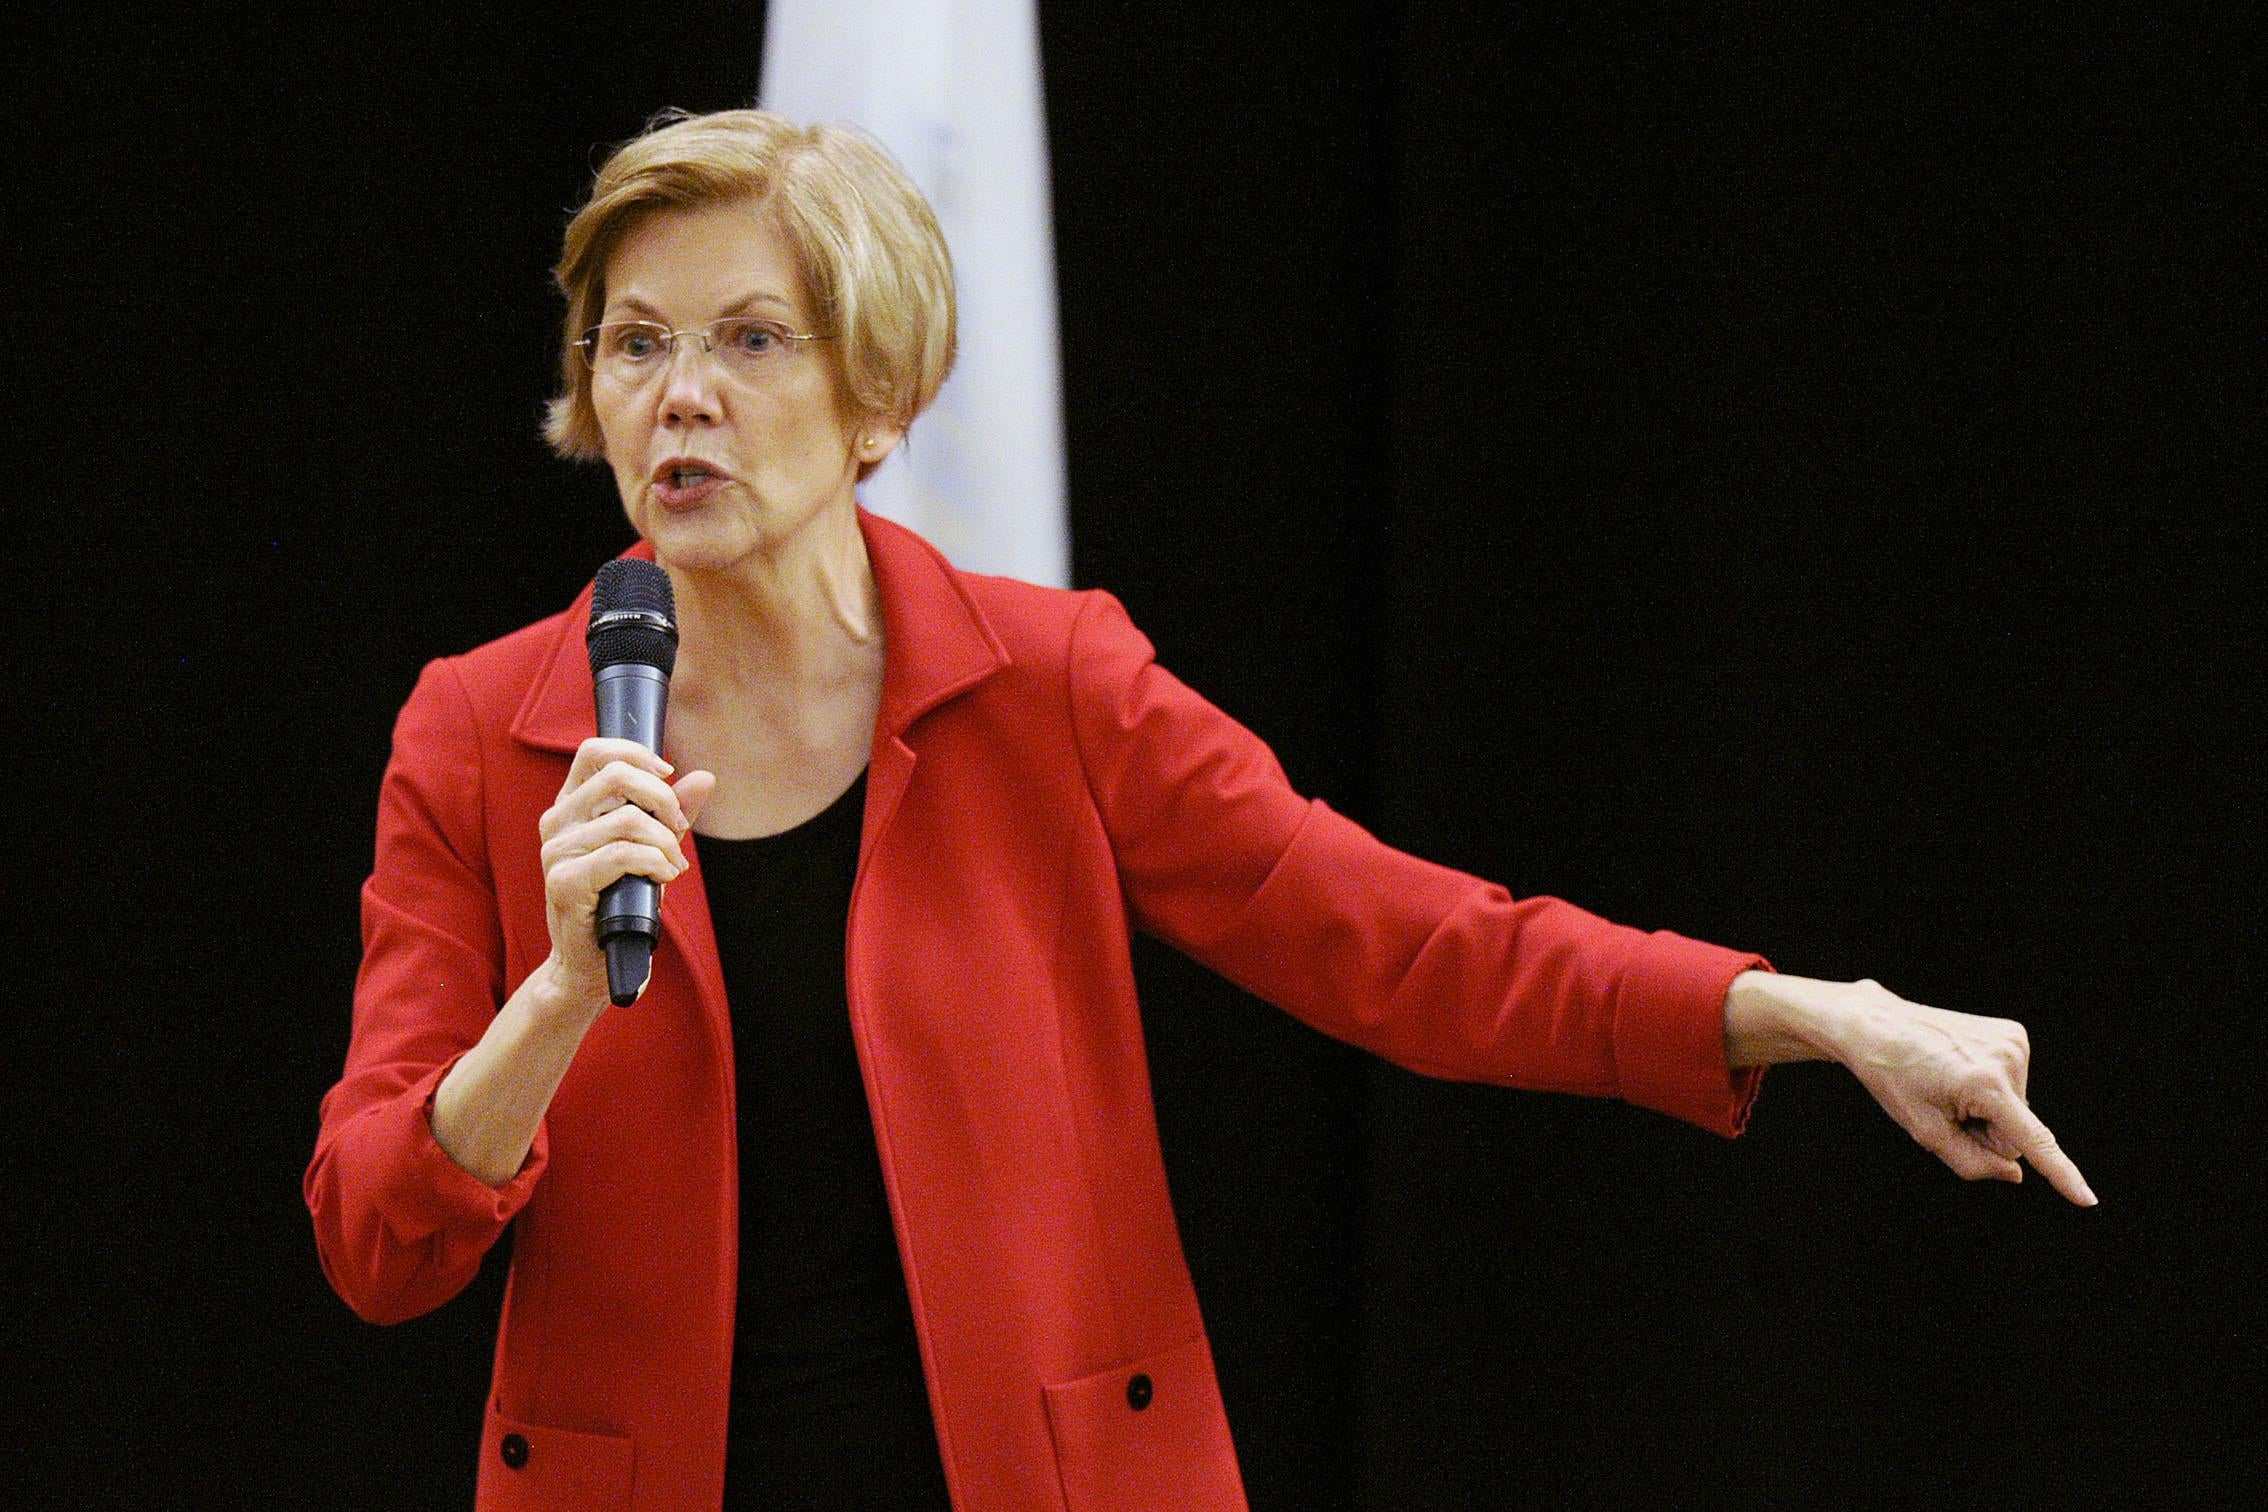 Sen. Warren, dressed in a red jacket, holds a microphone in one hand and with the other gestures toward the ground.